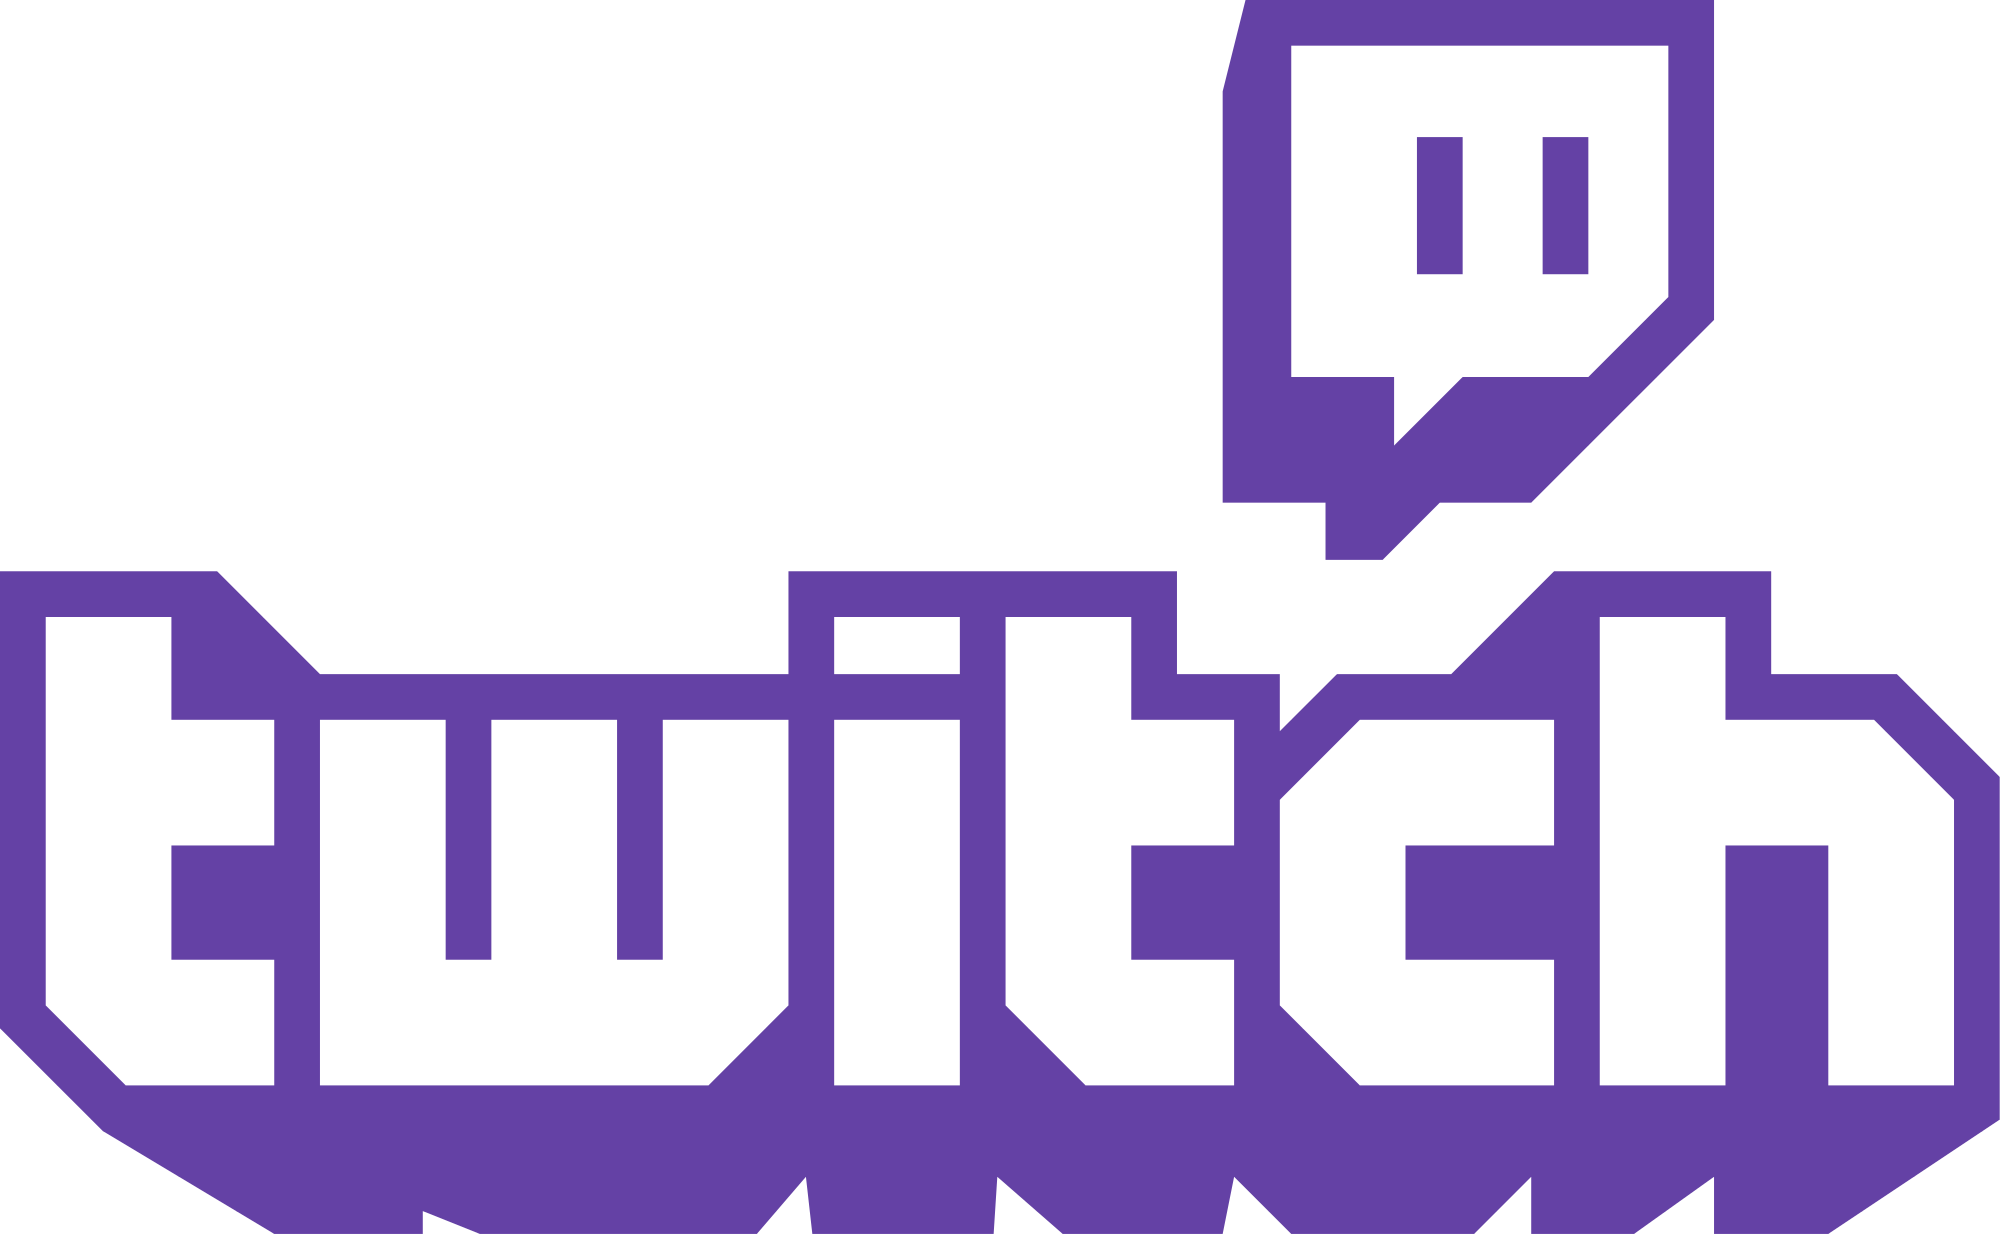 Twitch The Place to Stream Games And Soon To Buy? - Vgamerz - Free Twitch Logos